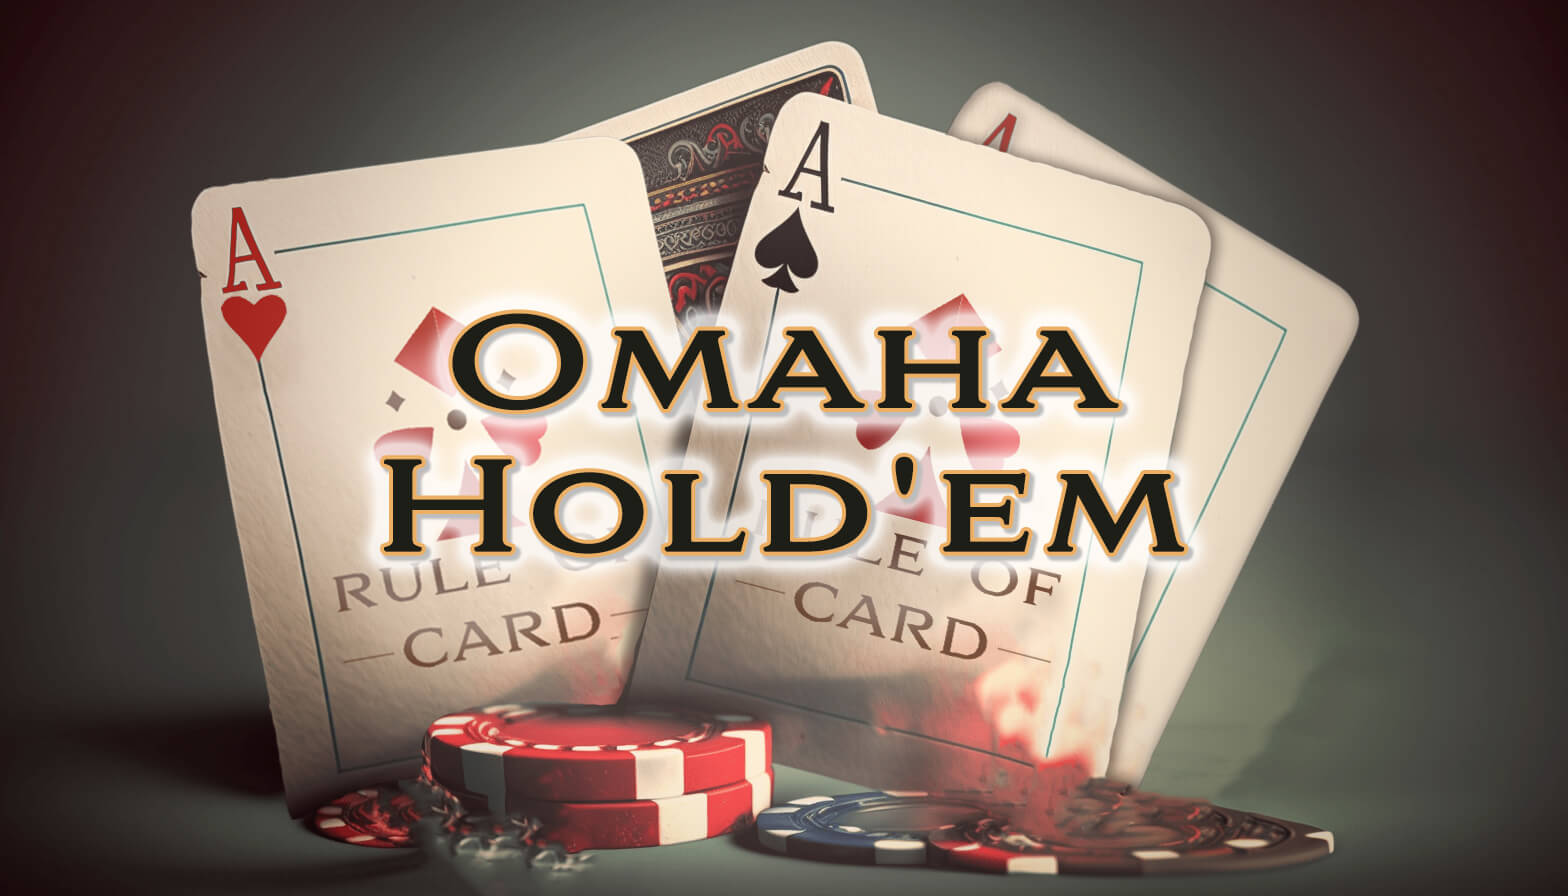 Playing the card game Omaha Hold'em